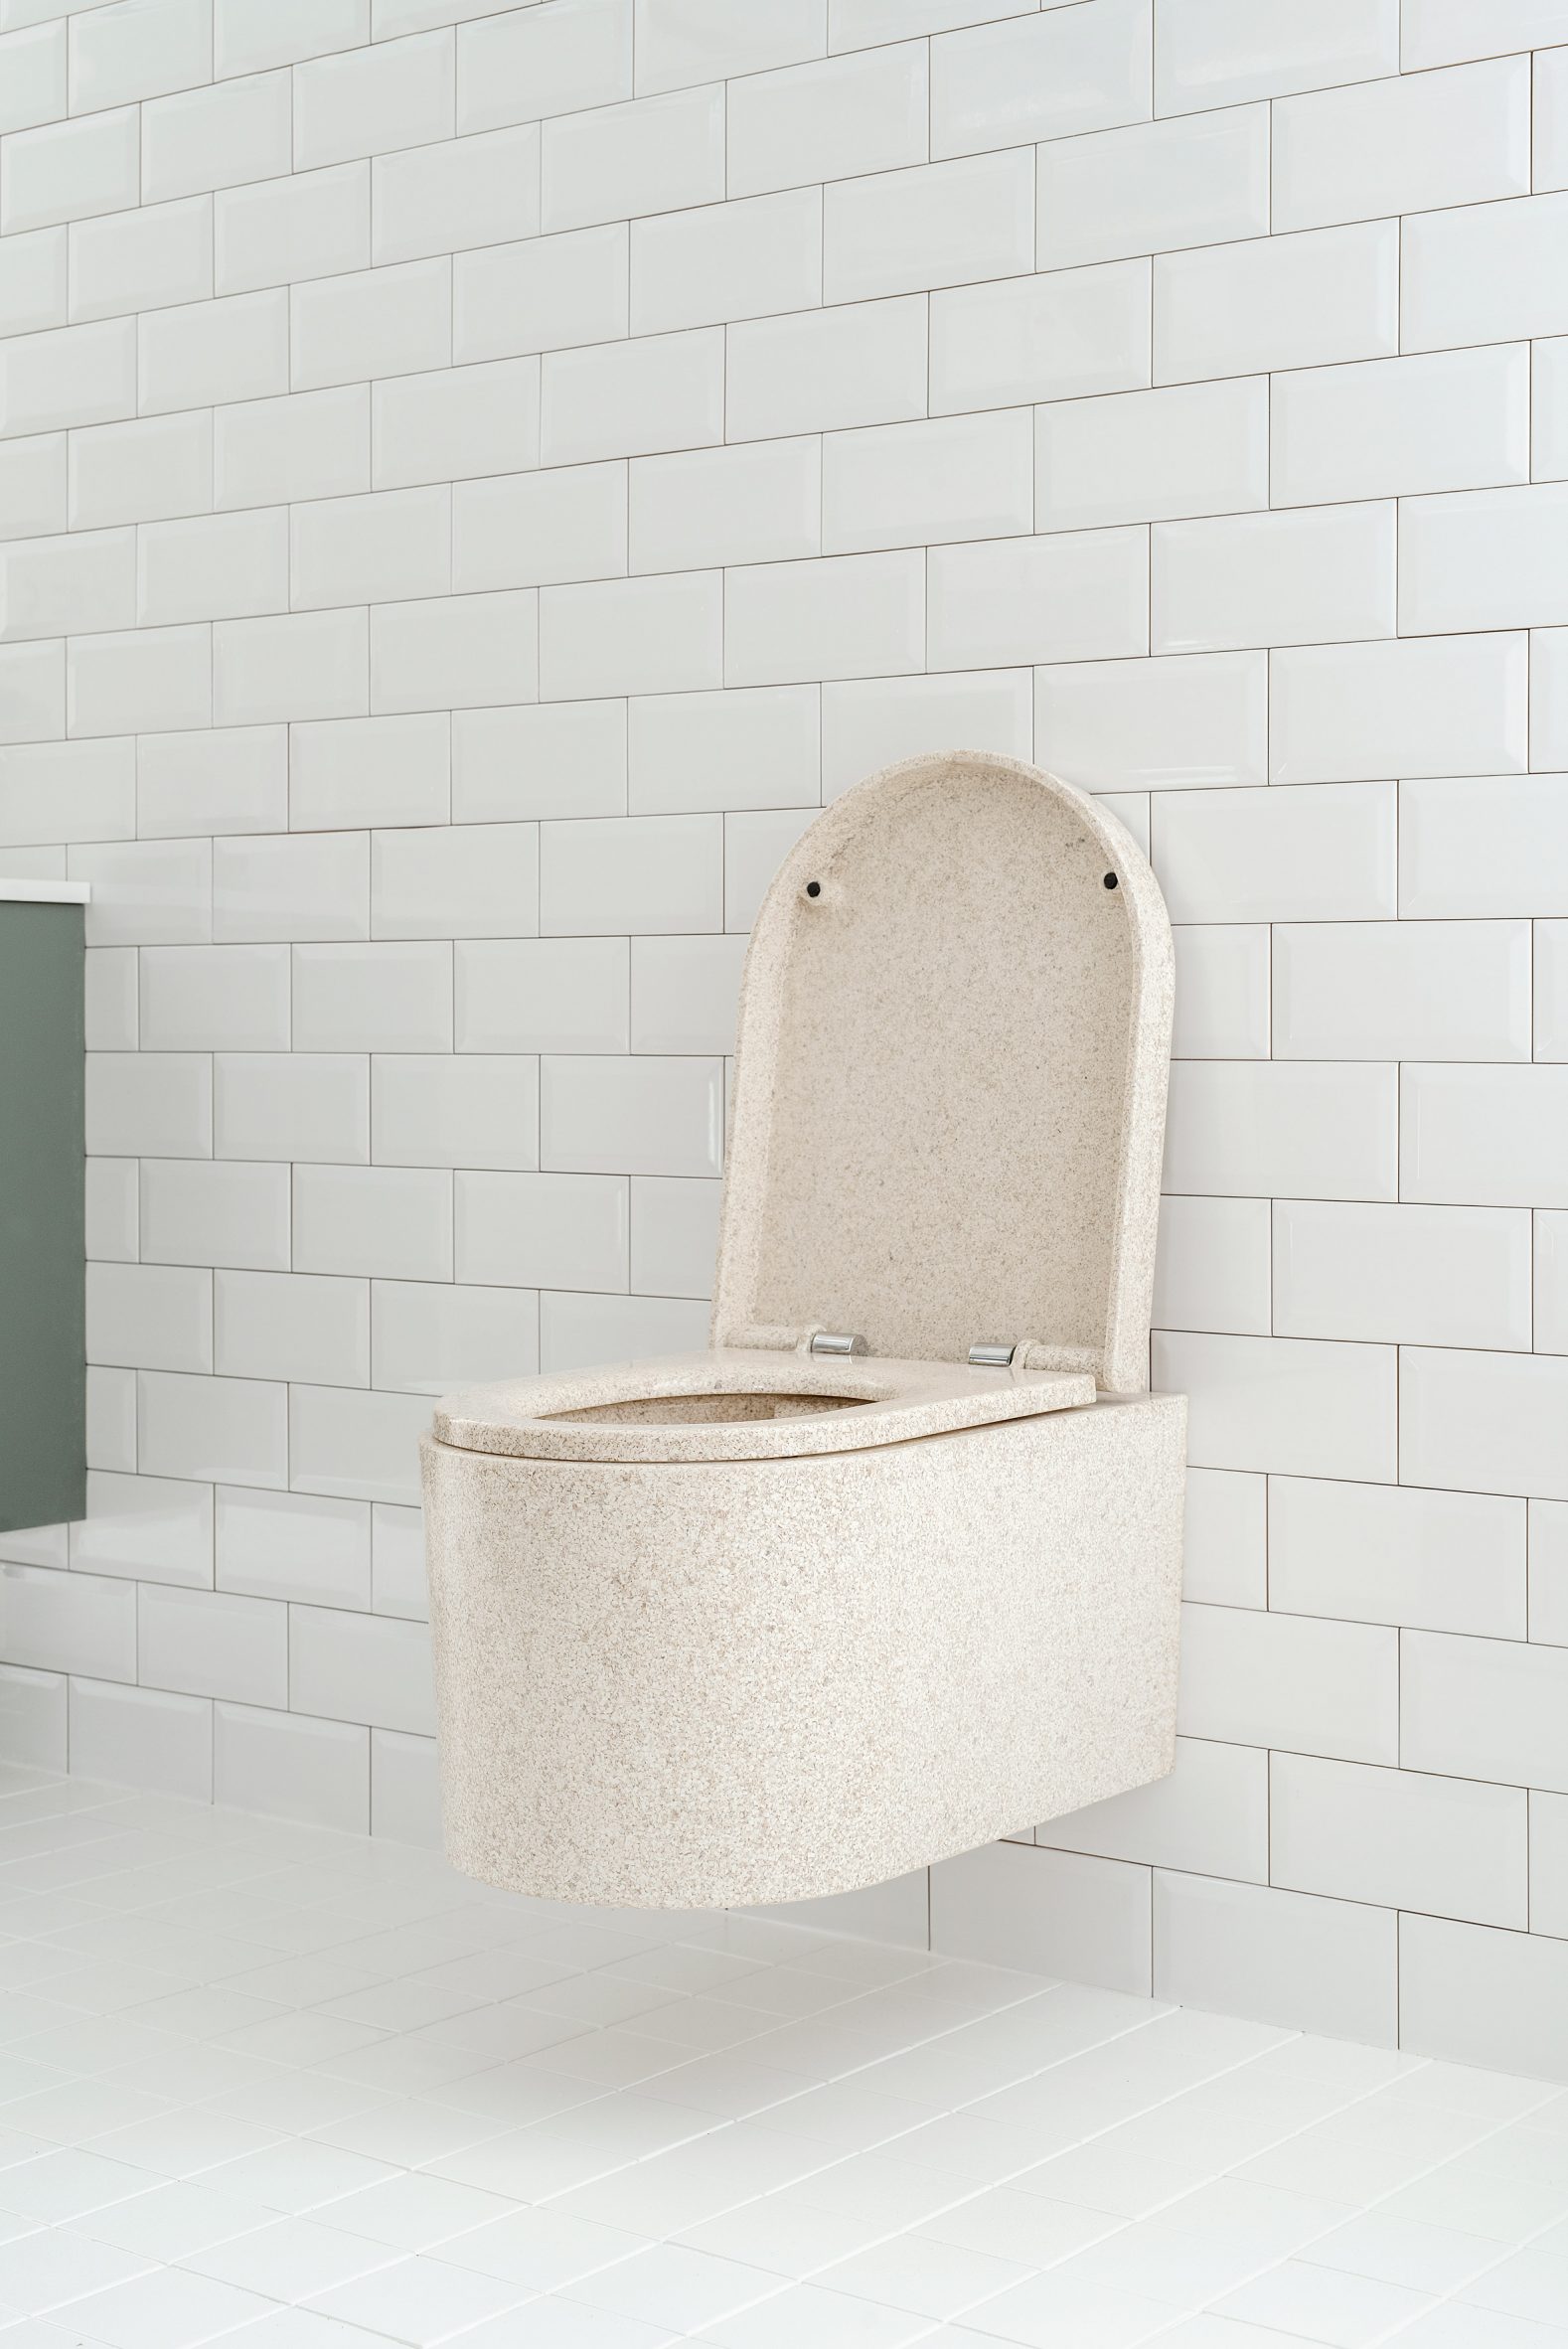 Wood composite toilet in a bathroom